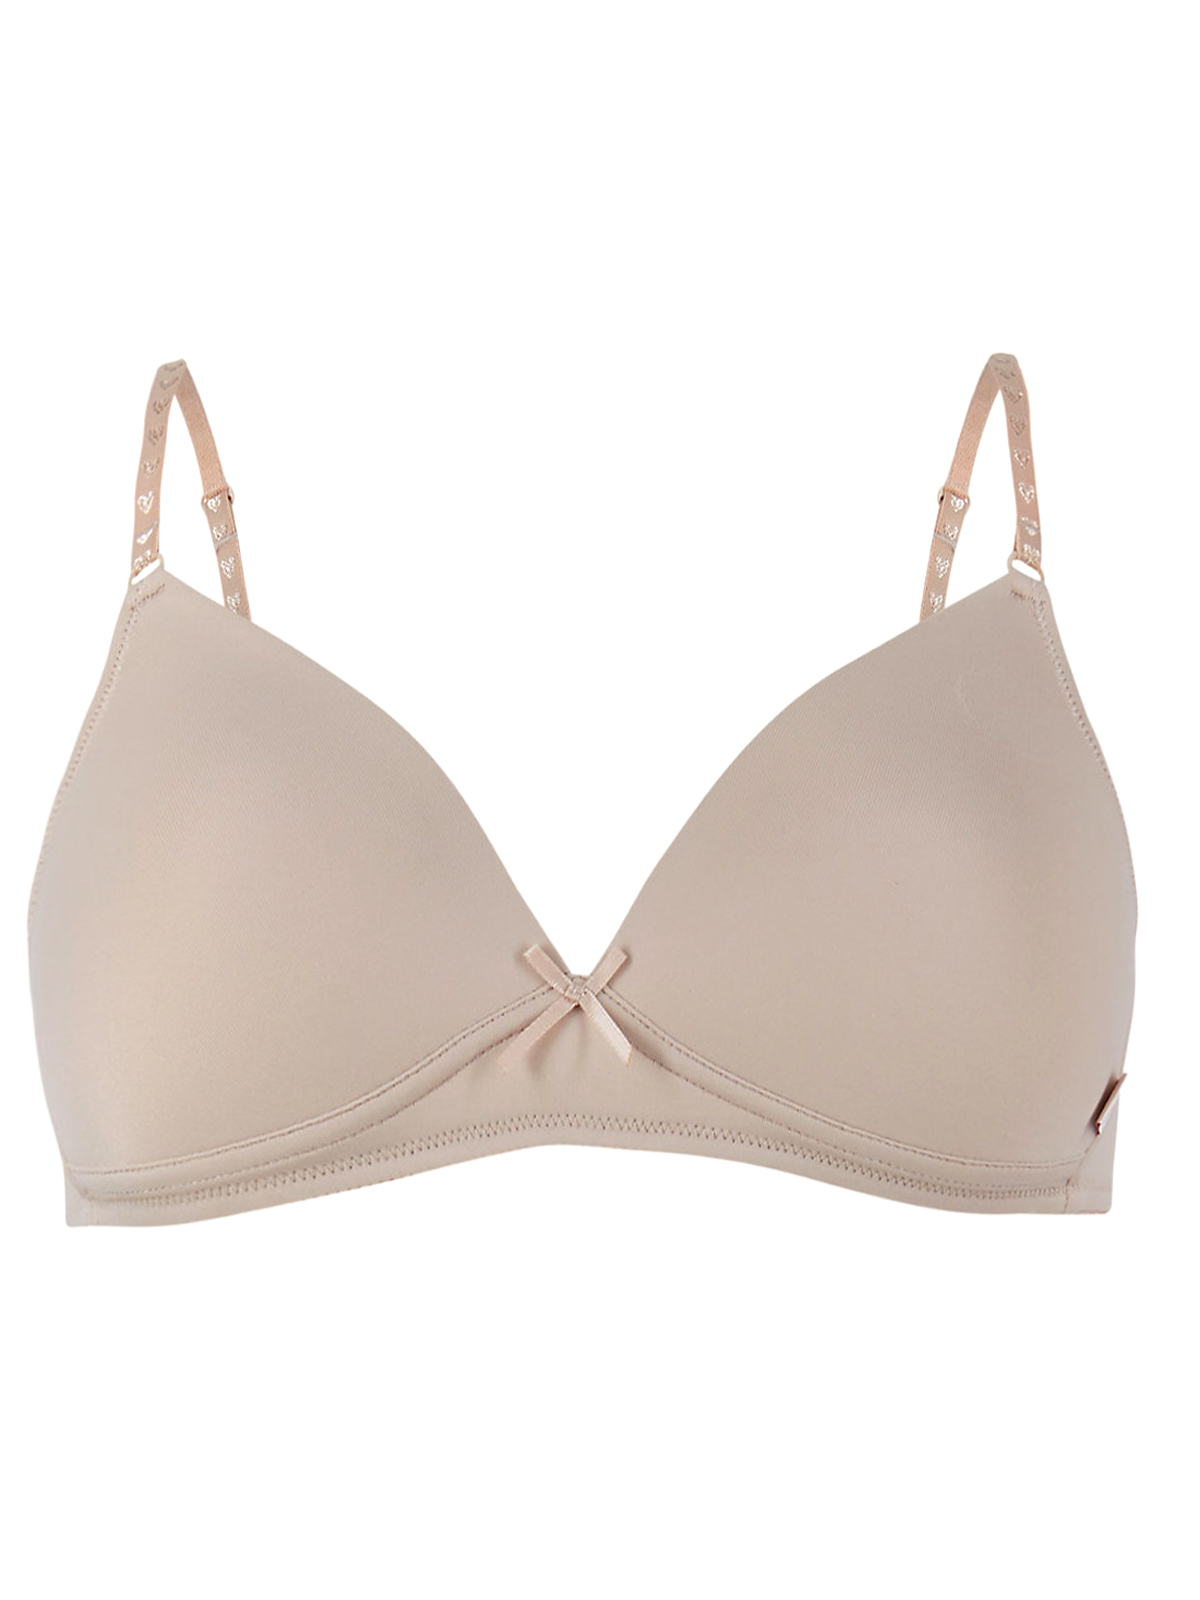 Marks and Spencer - - M&5 BEIGE Moulded Non-Wired First Bra - Size 30 ...